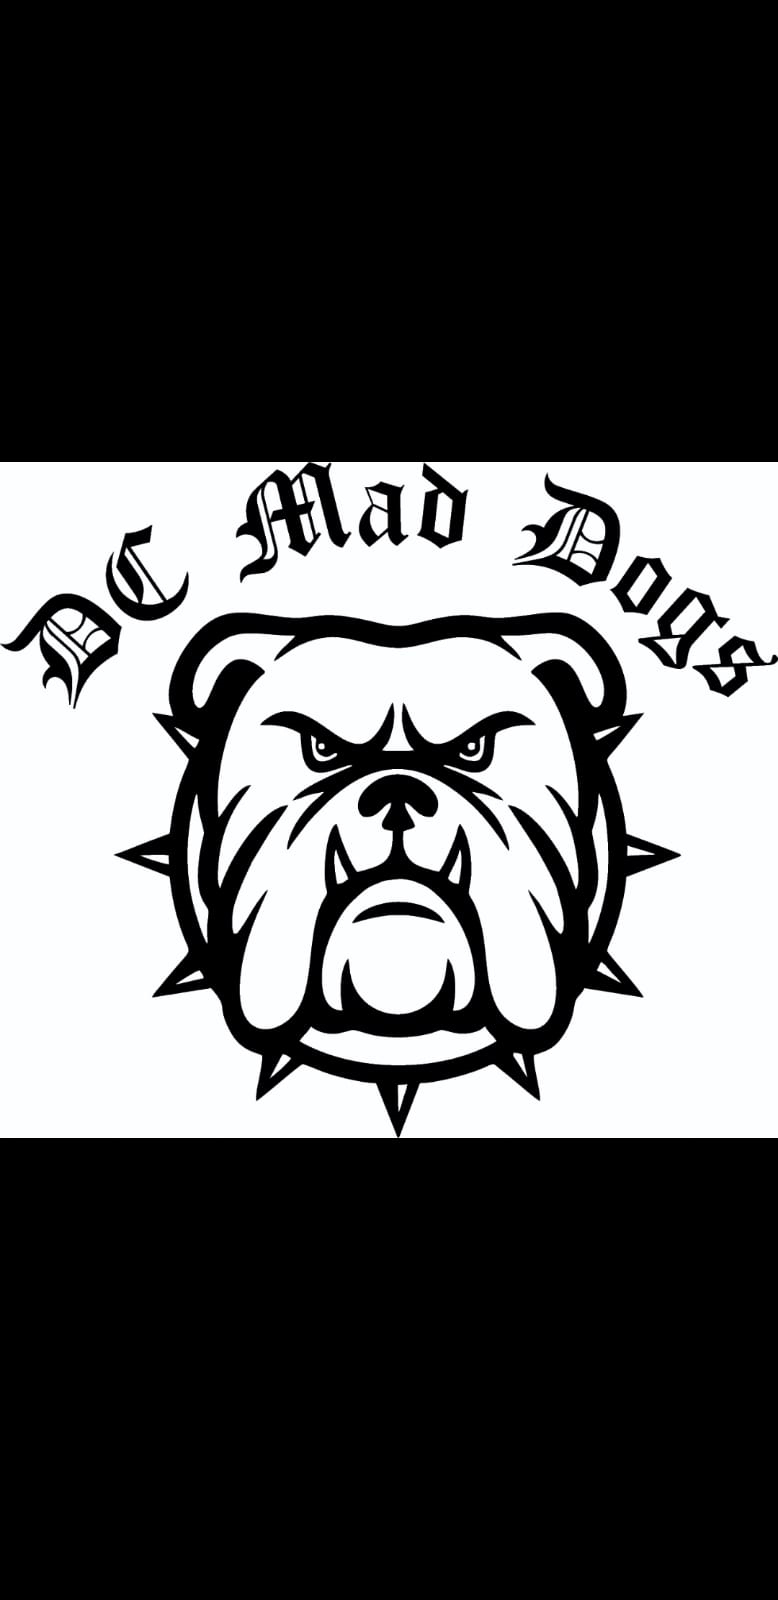 DC Mad Dogs